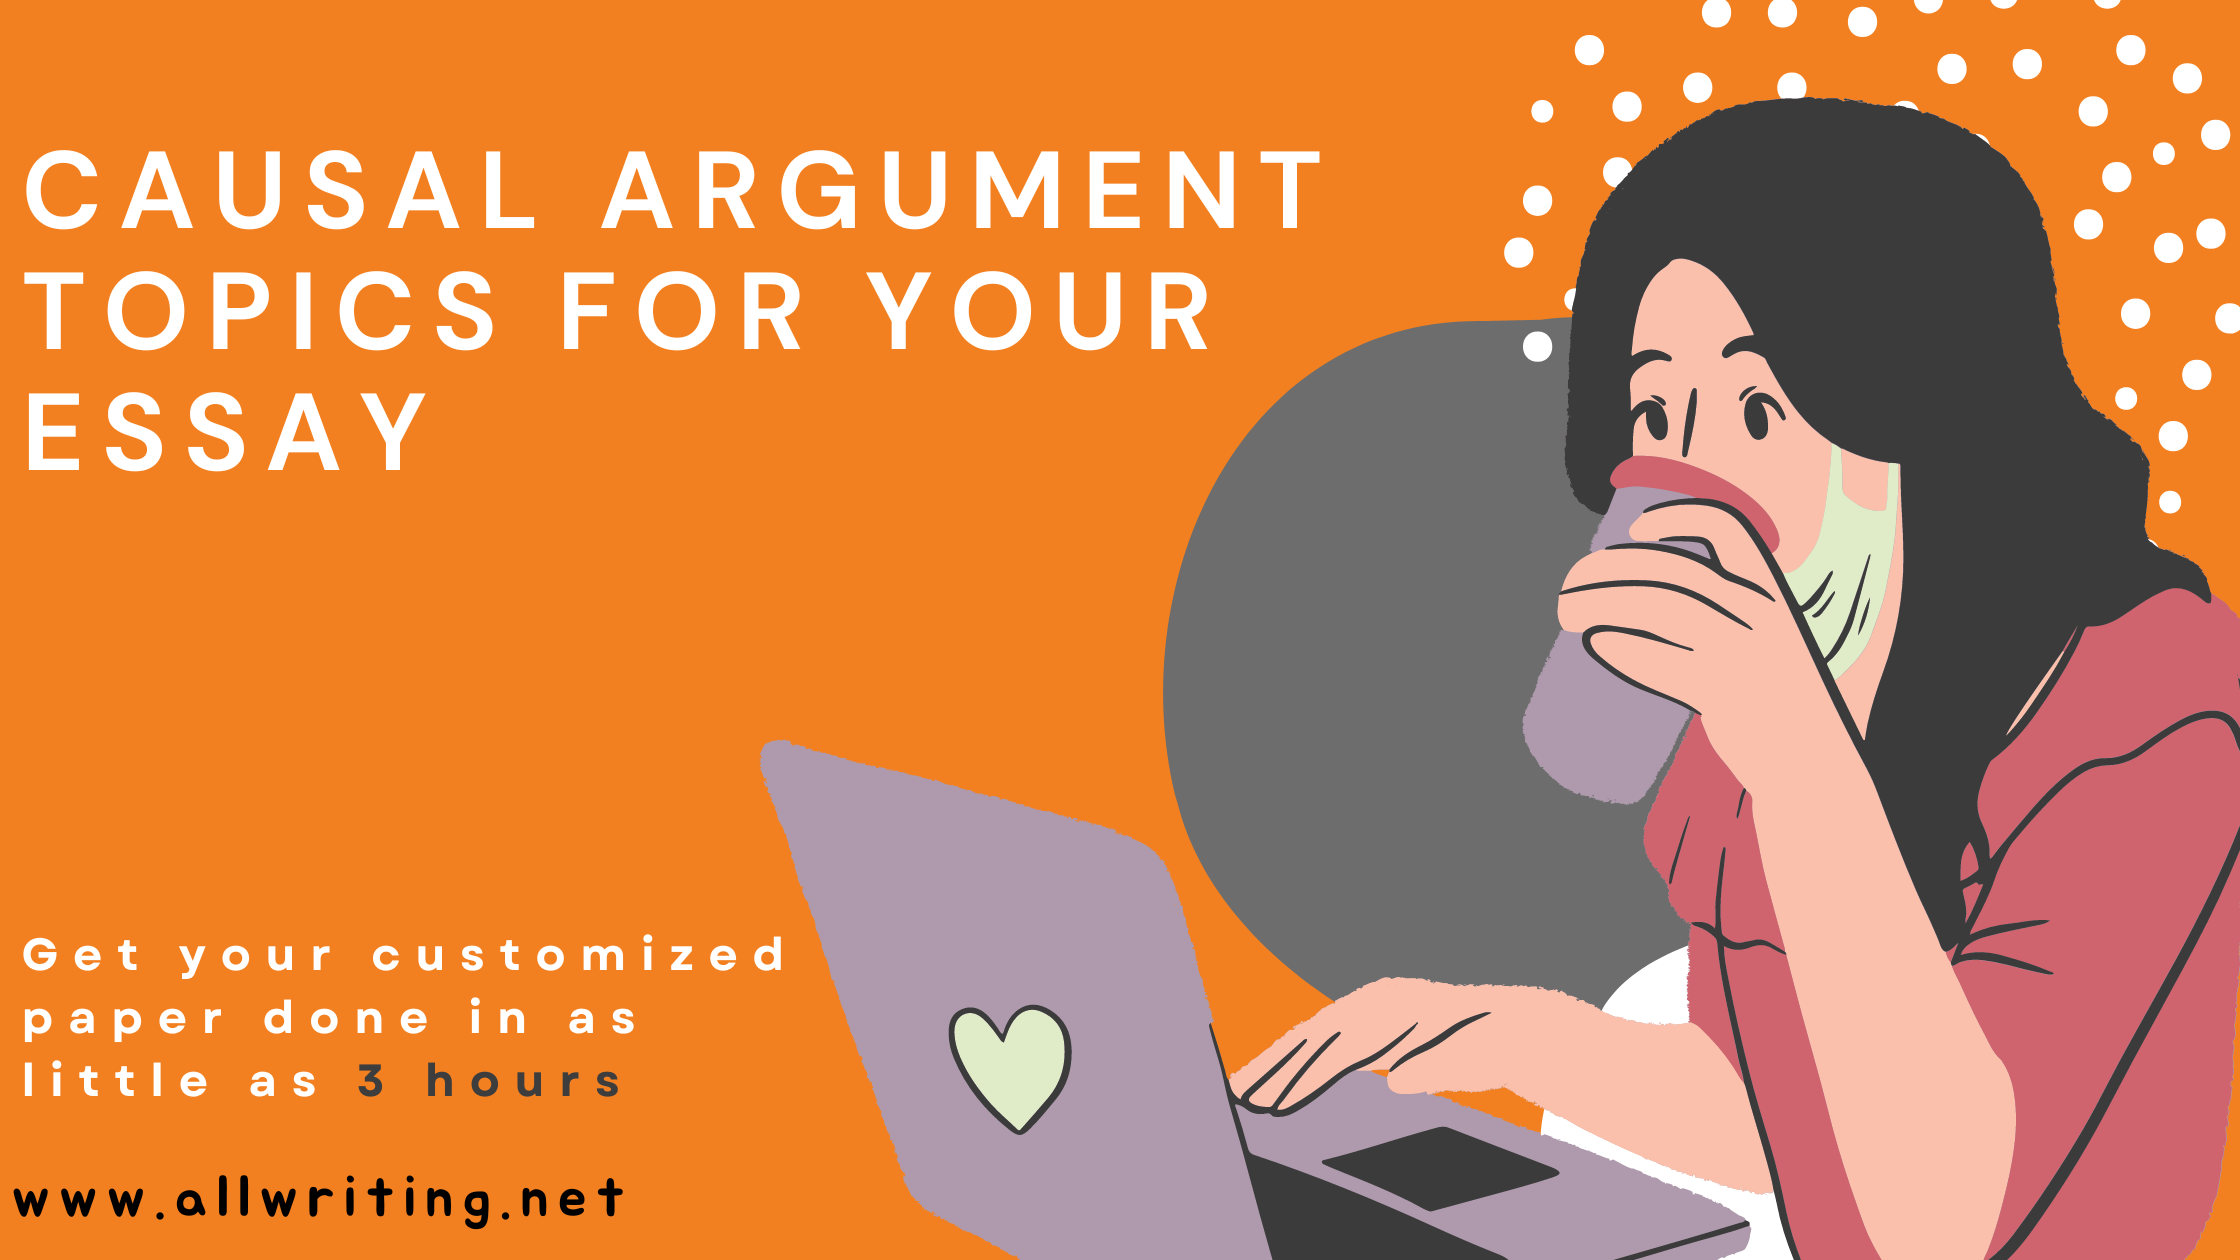 Causal Argument Topics for your Essay